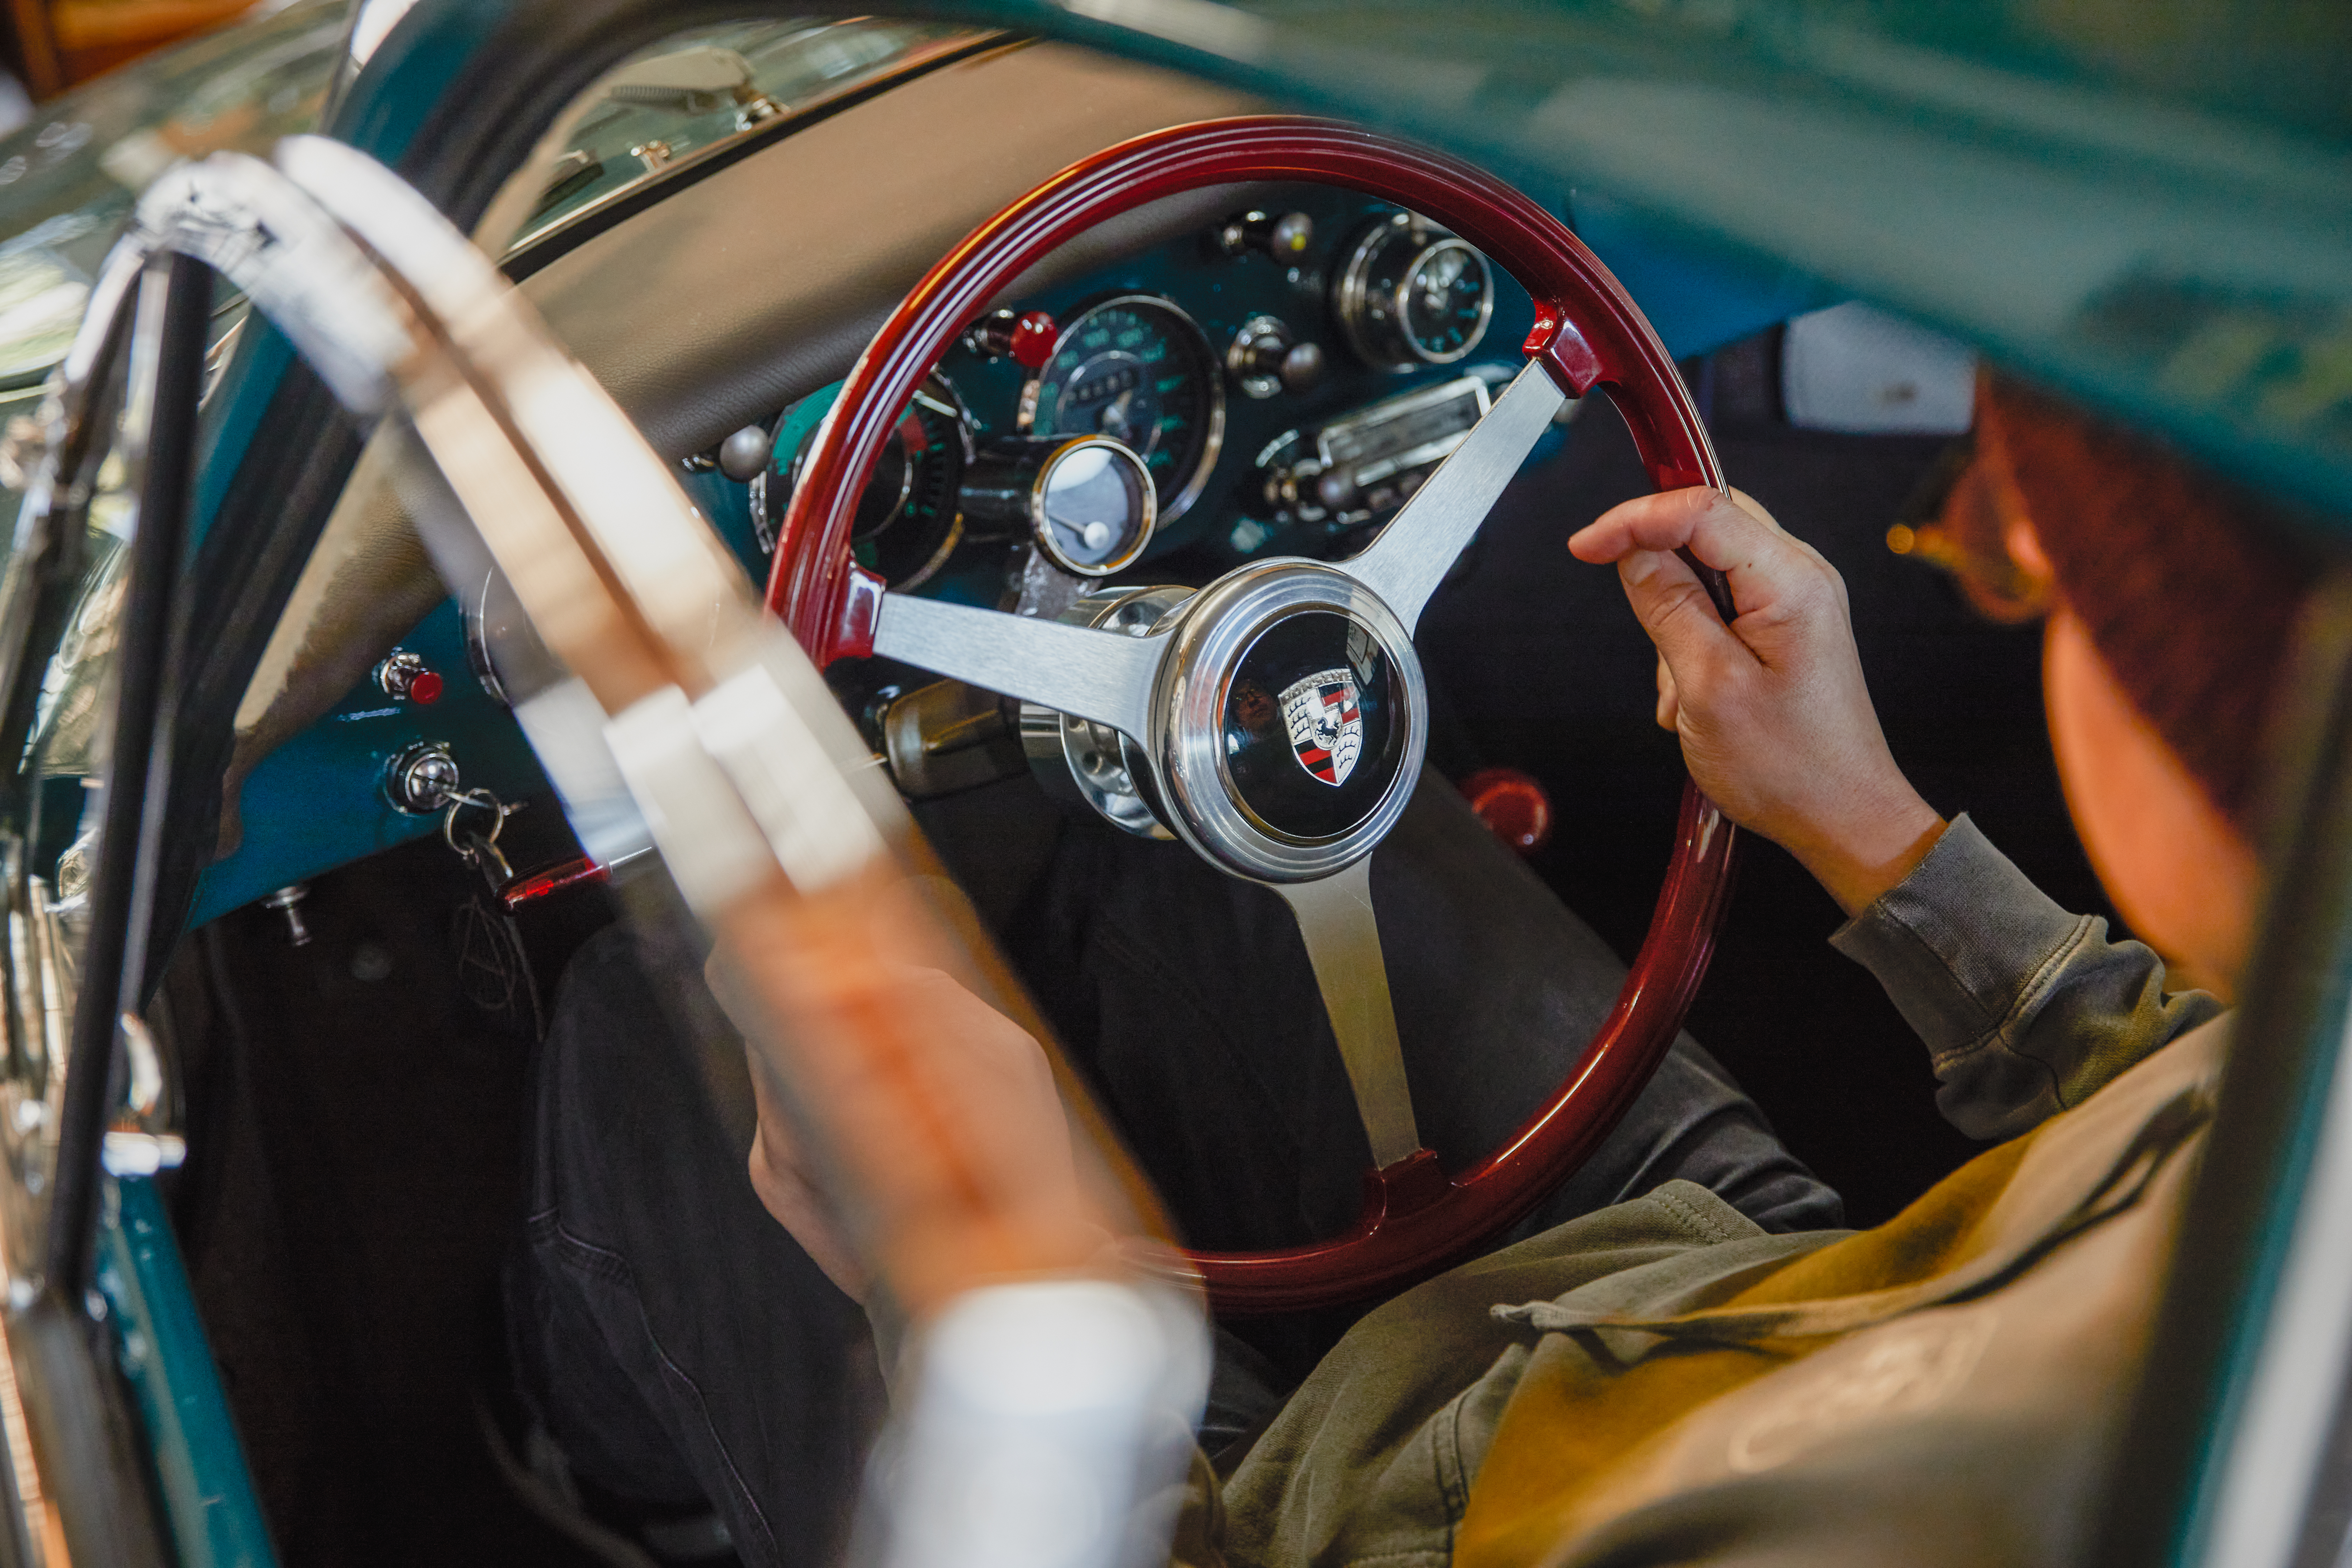 View of car interior with man’s hands on steering wheel